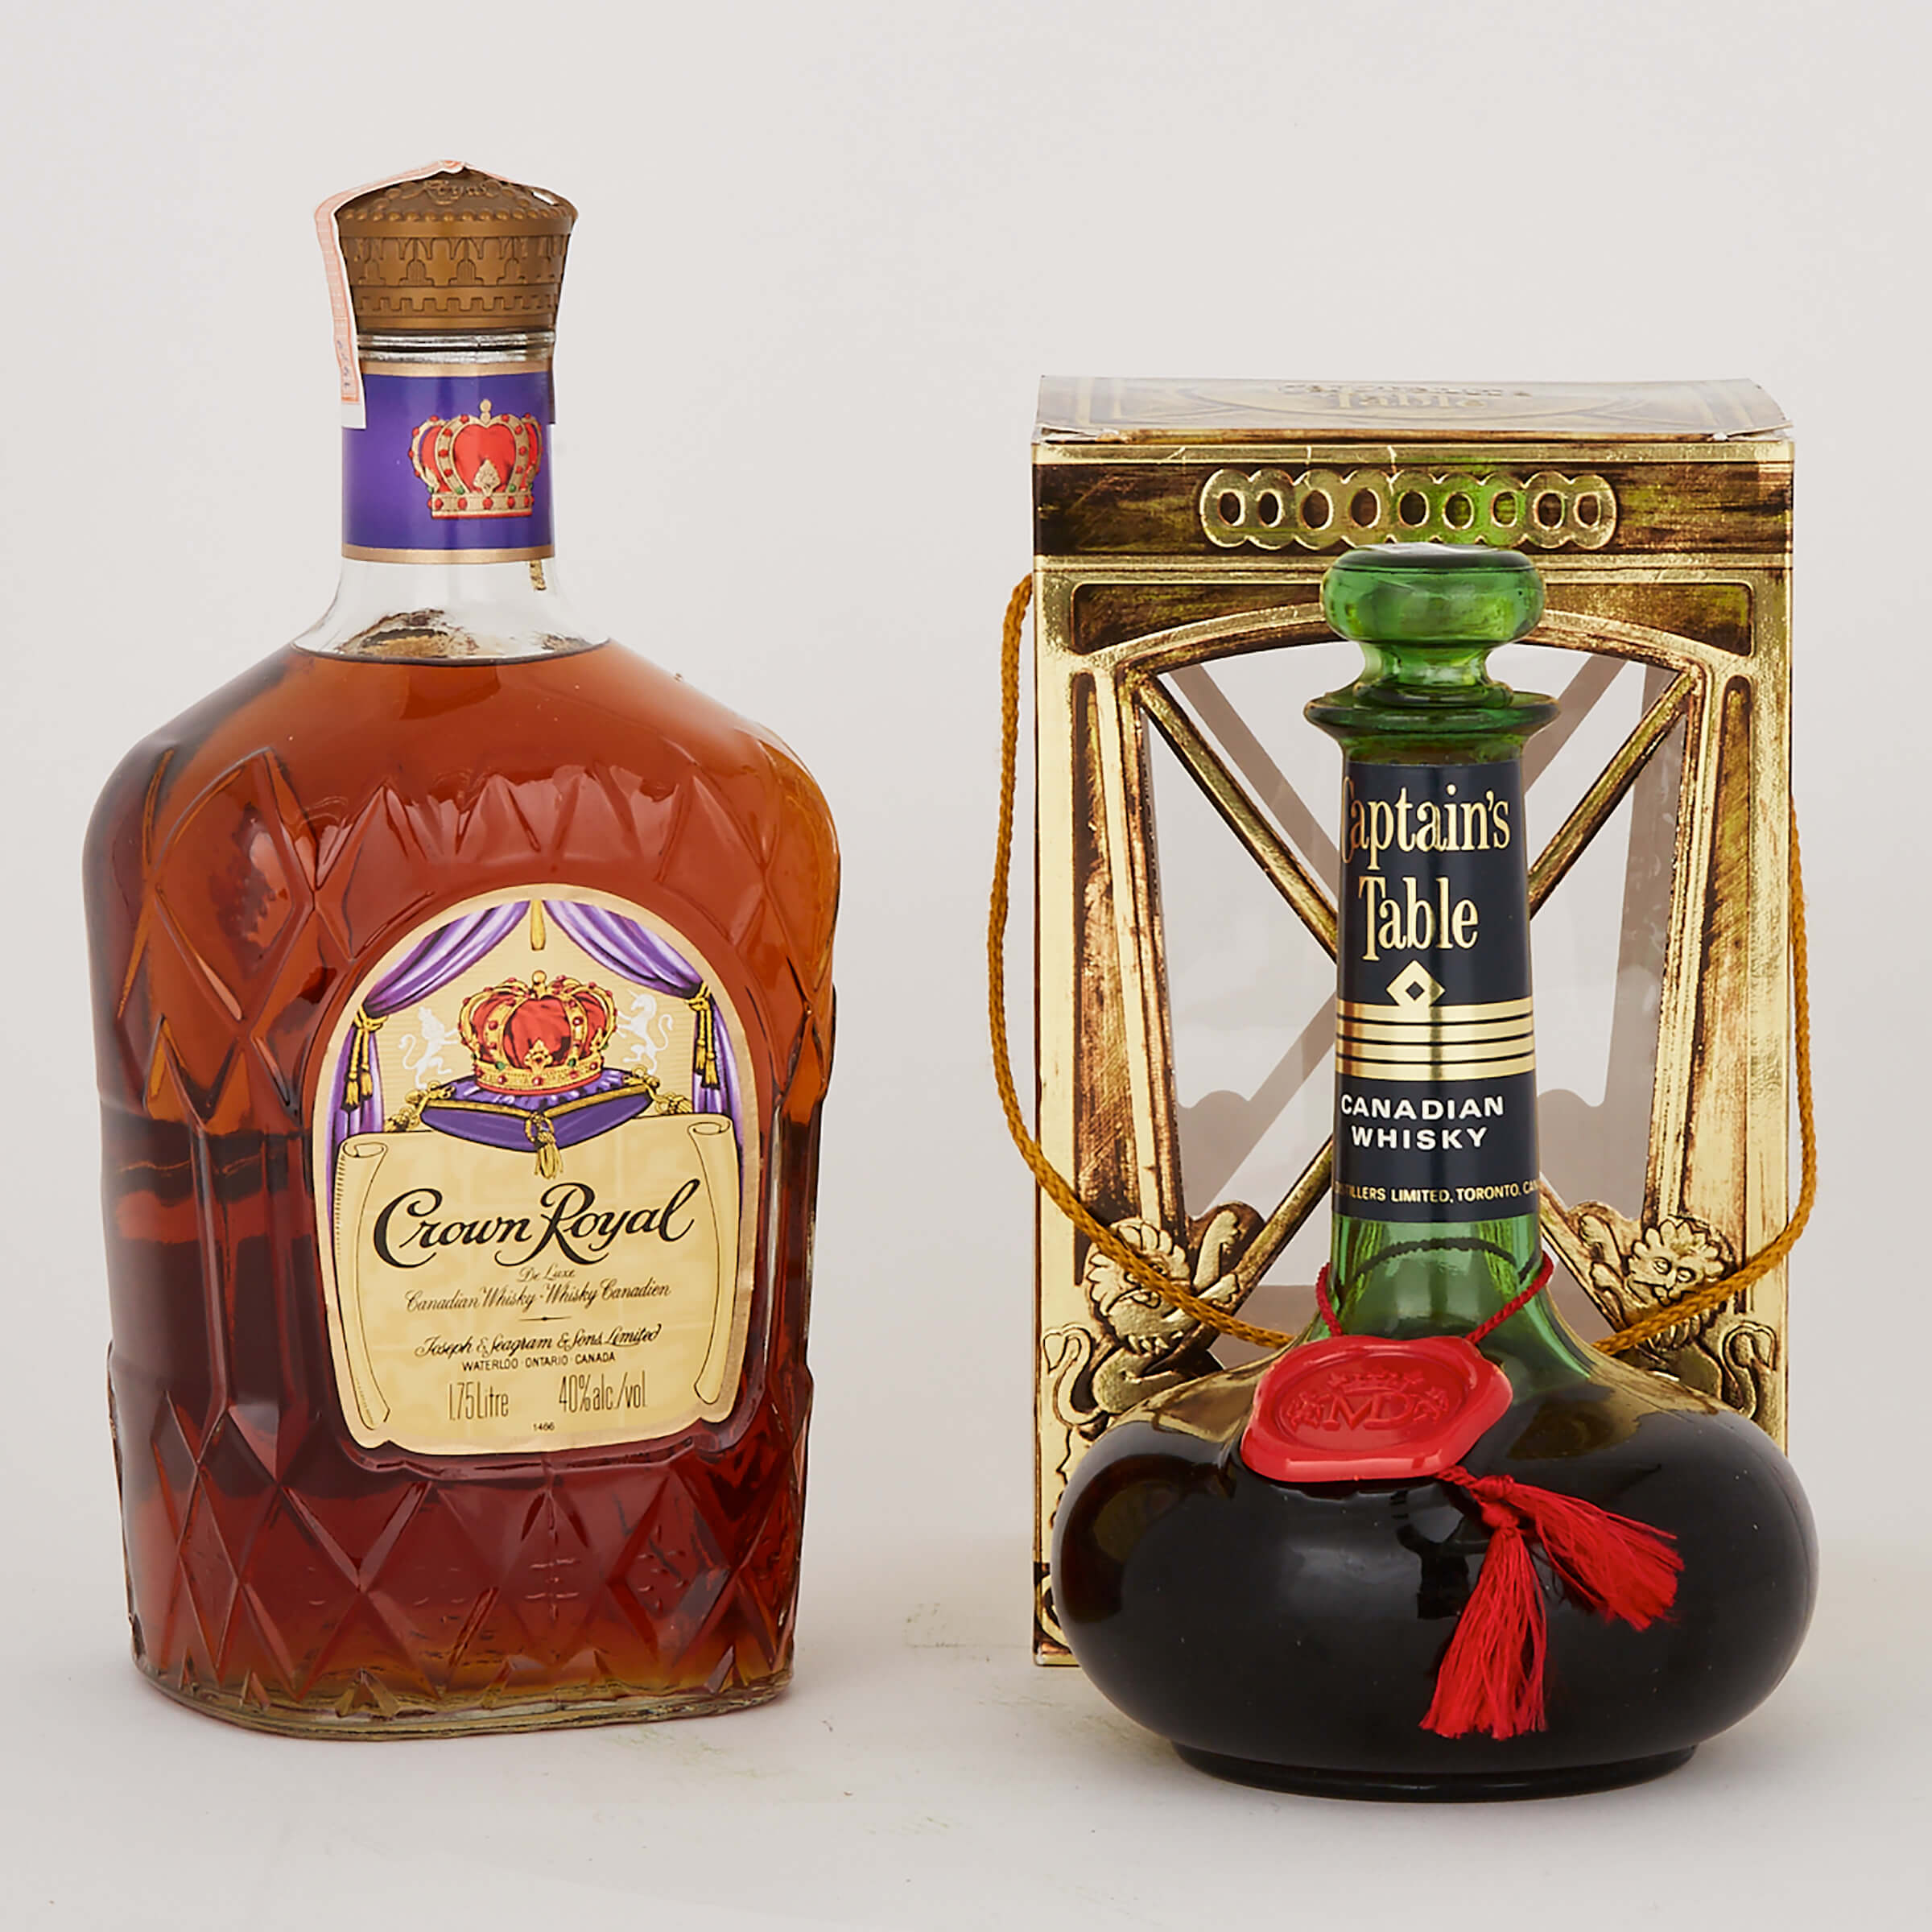 CAPTAIN’S TABLE CANADIAN WHISKY (ONE 25 FL OZ)
CROWN ROYAL CANADIAN WHISKY (ONE 1750 ML)